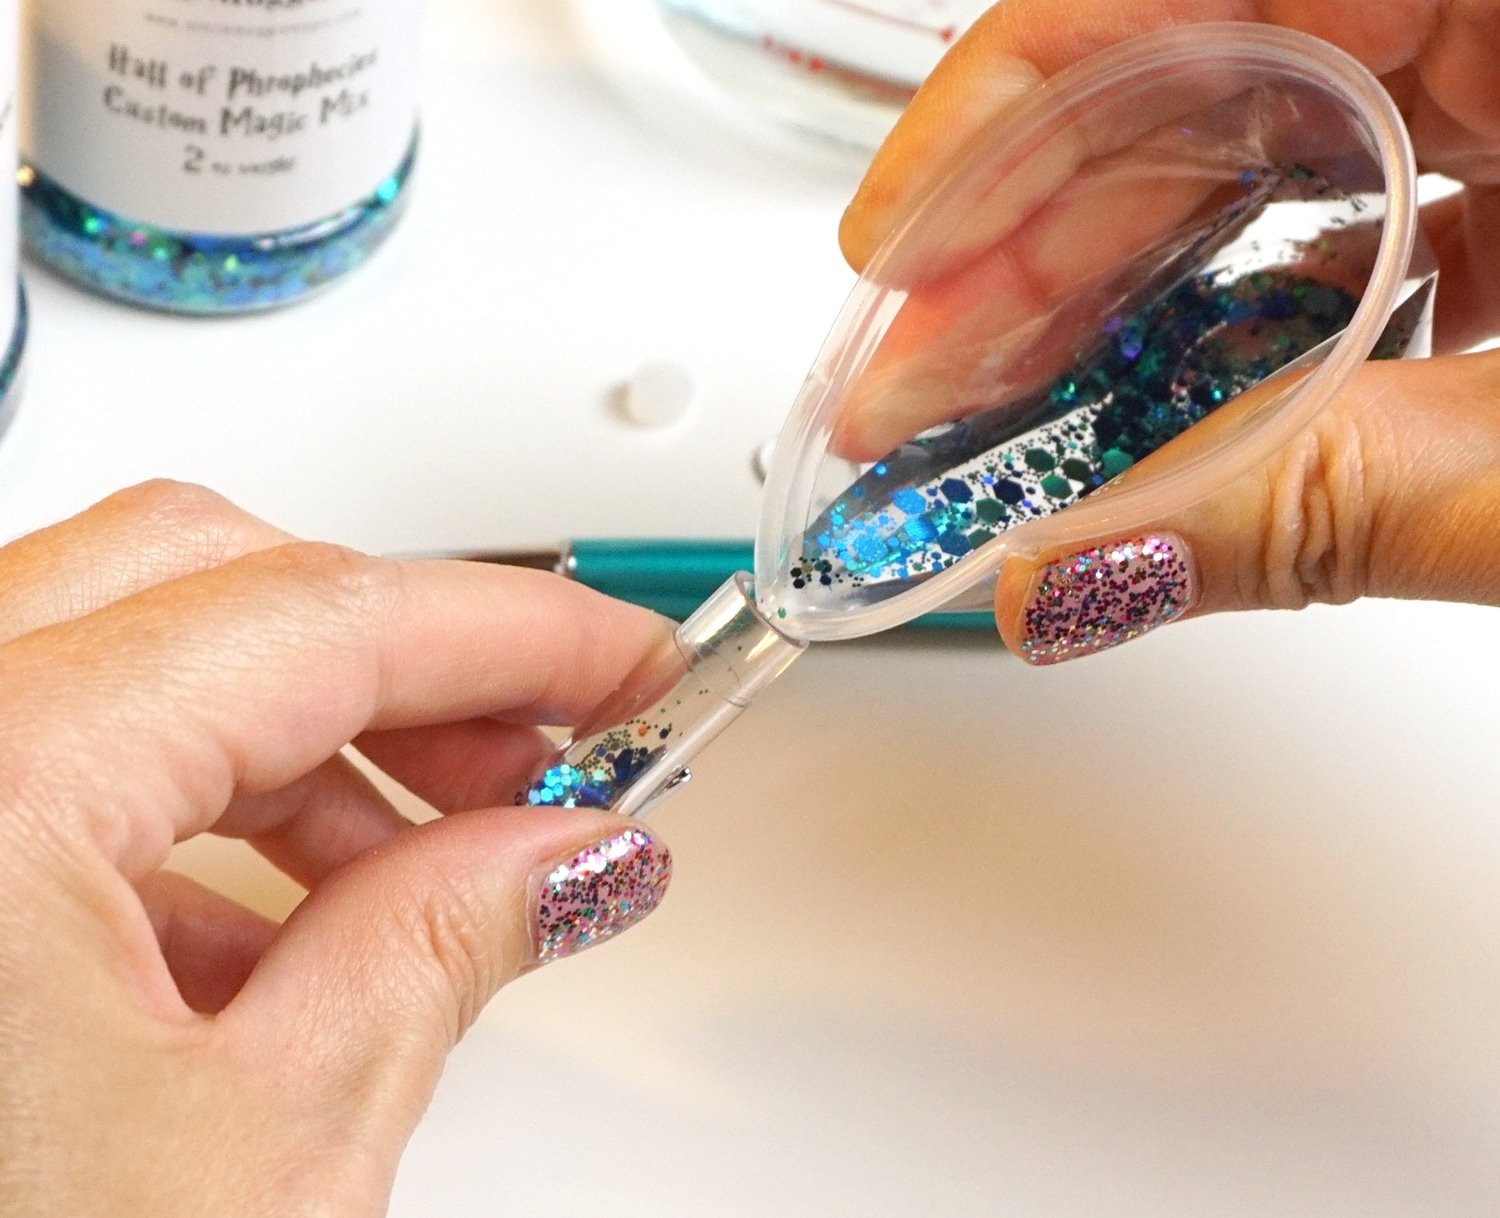 pouring glitter mixture in pen casing